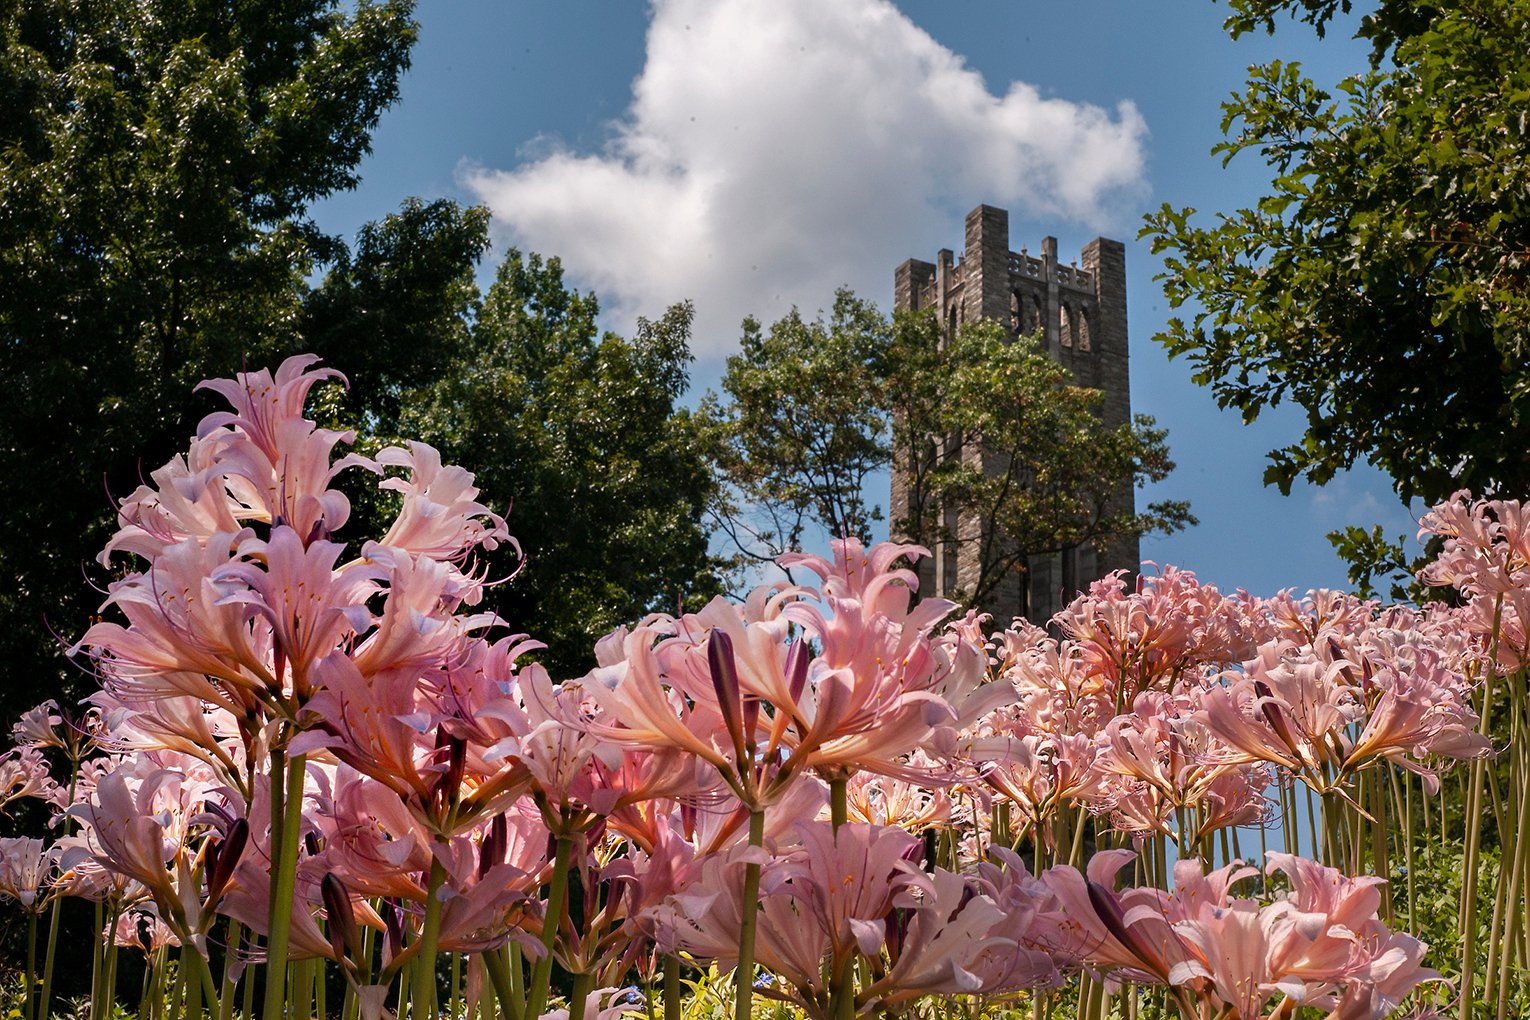 Pink lowers in foreground with bell tower in background